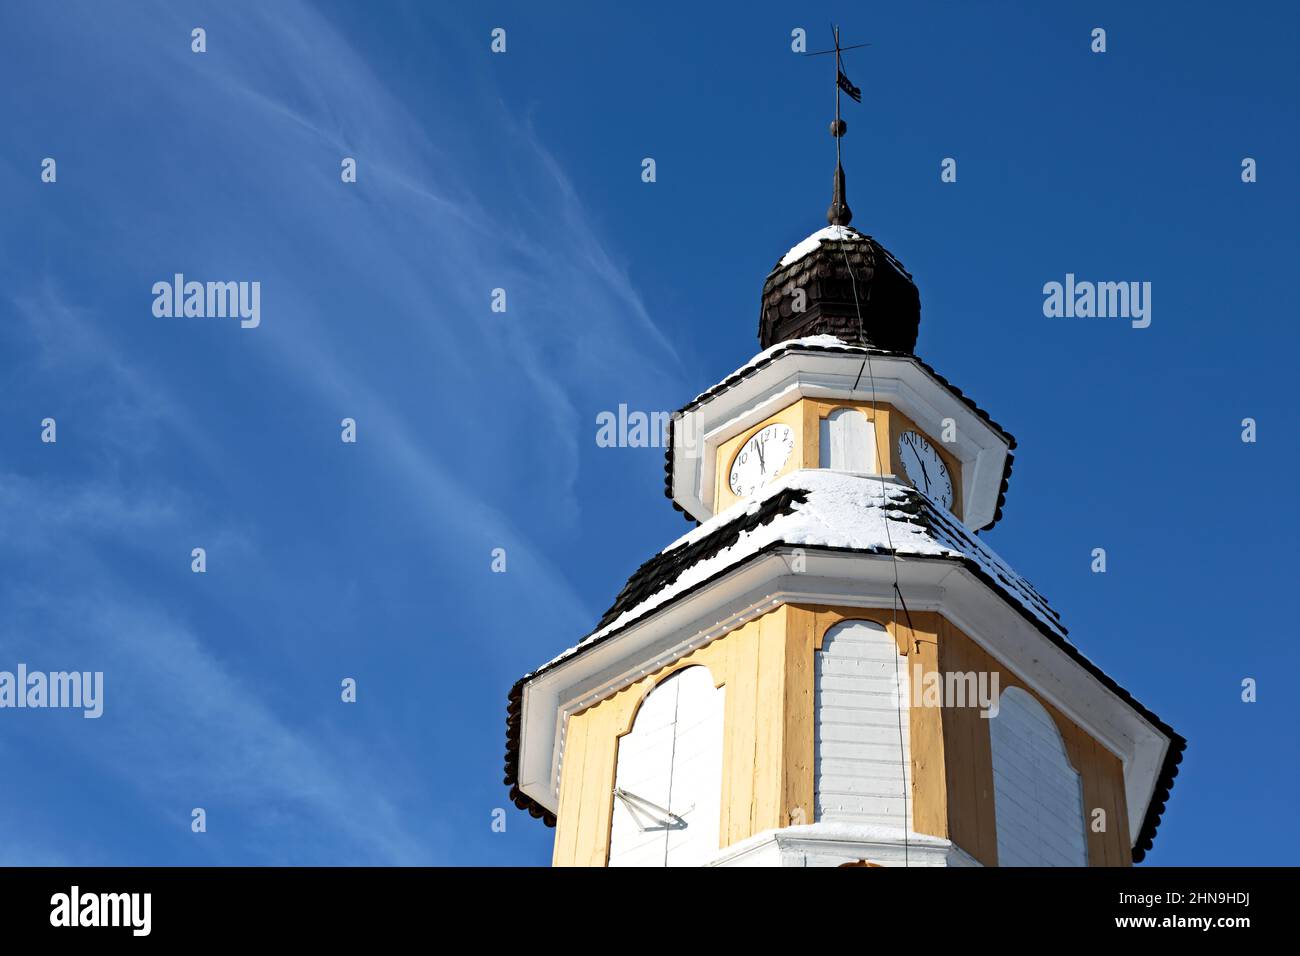 A yellow clock tower of an old church with blue sky and white thin cloud on a background Stock Photo